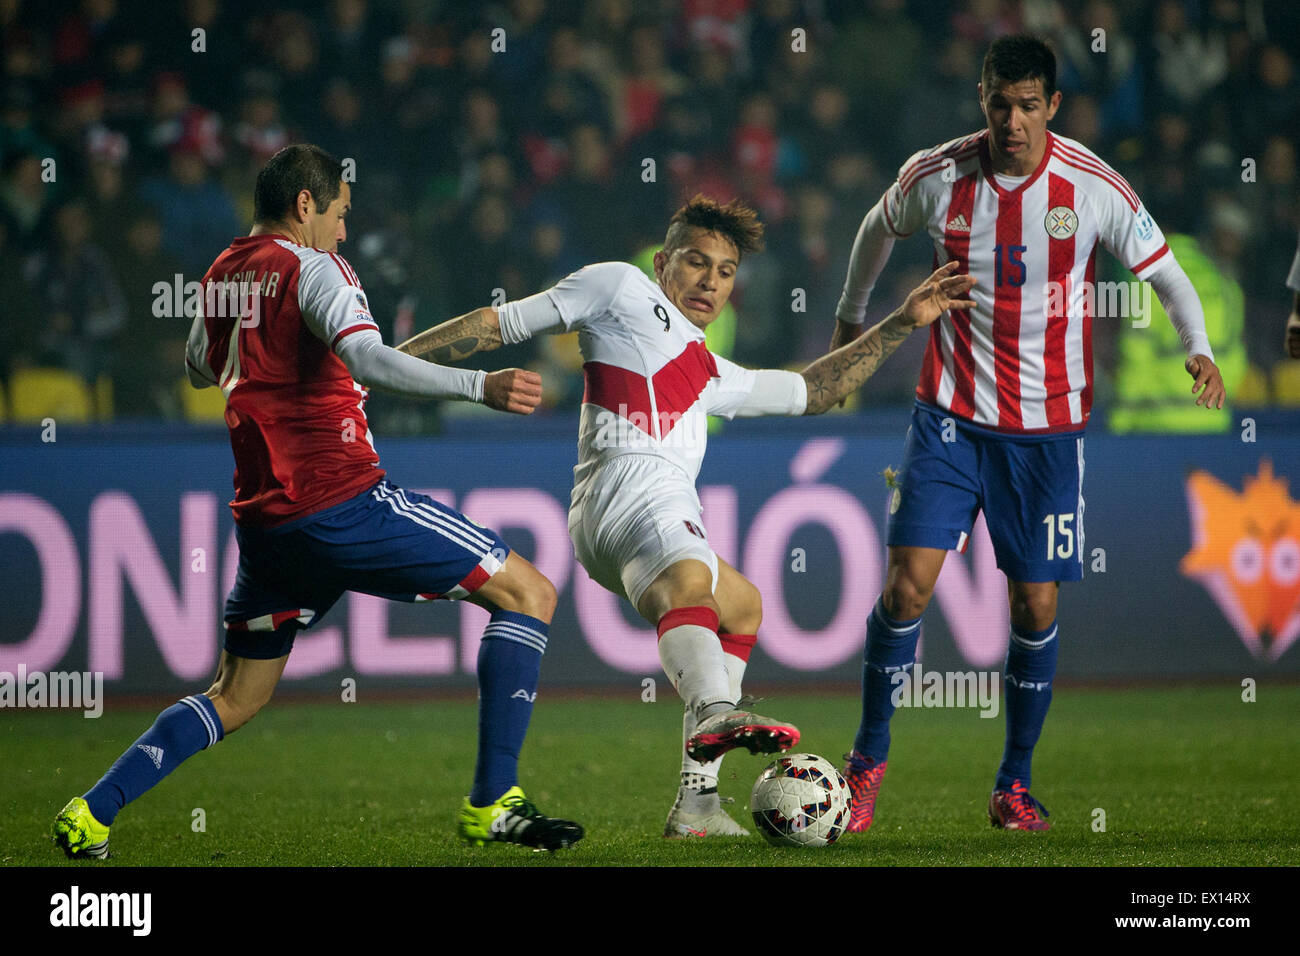 Concepcion, Chile. 3rd July, 2015. Peru's Jose Paolo Guerrero (C) vies with Paraguay's Pablo Aguilar (L) and Victor Caceres during the match for the Third Place of the America Cup Chile 2015, held in the Municipal Stadium 'Alcaldesa Ester Roa Rebolledo', in Concepcion, Chile, on July 3, 2015. Credit:  Pedro Mera/Xinhua/Alamy Live News Stock Photo